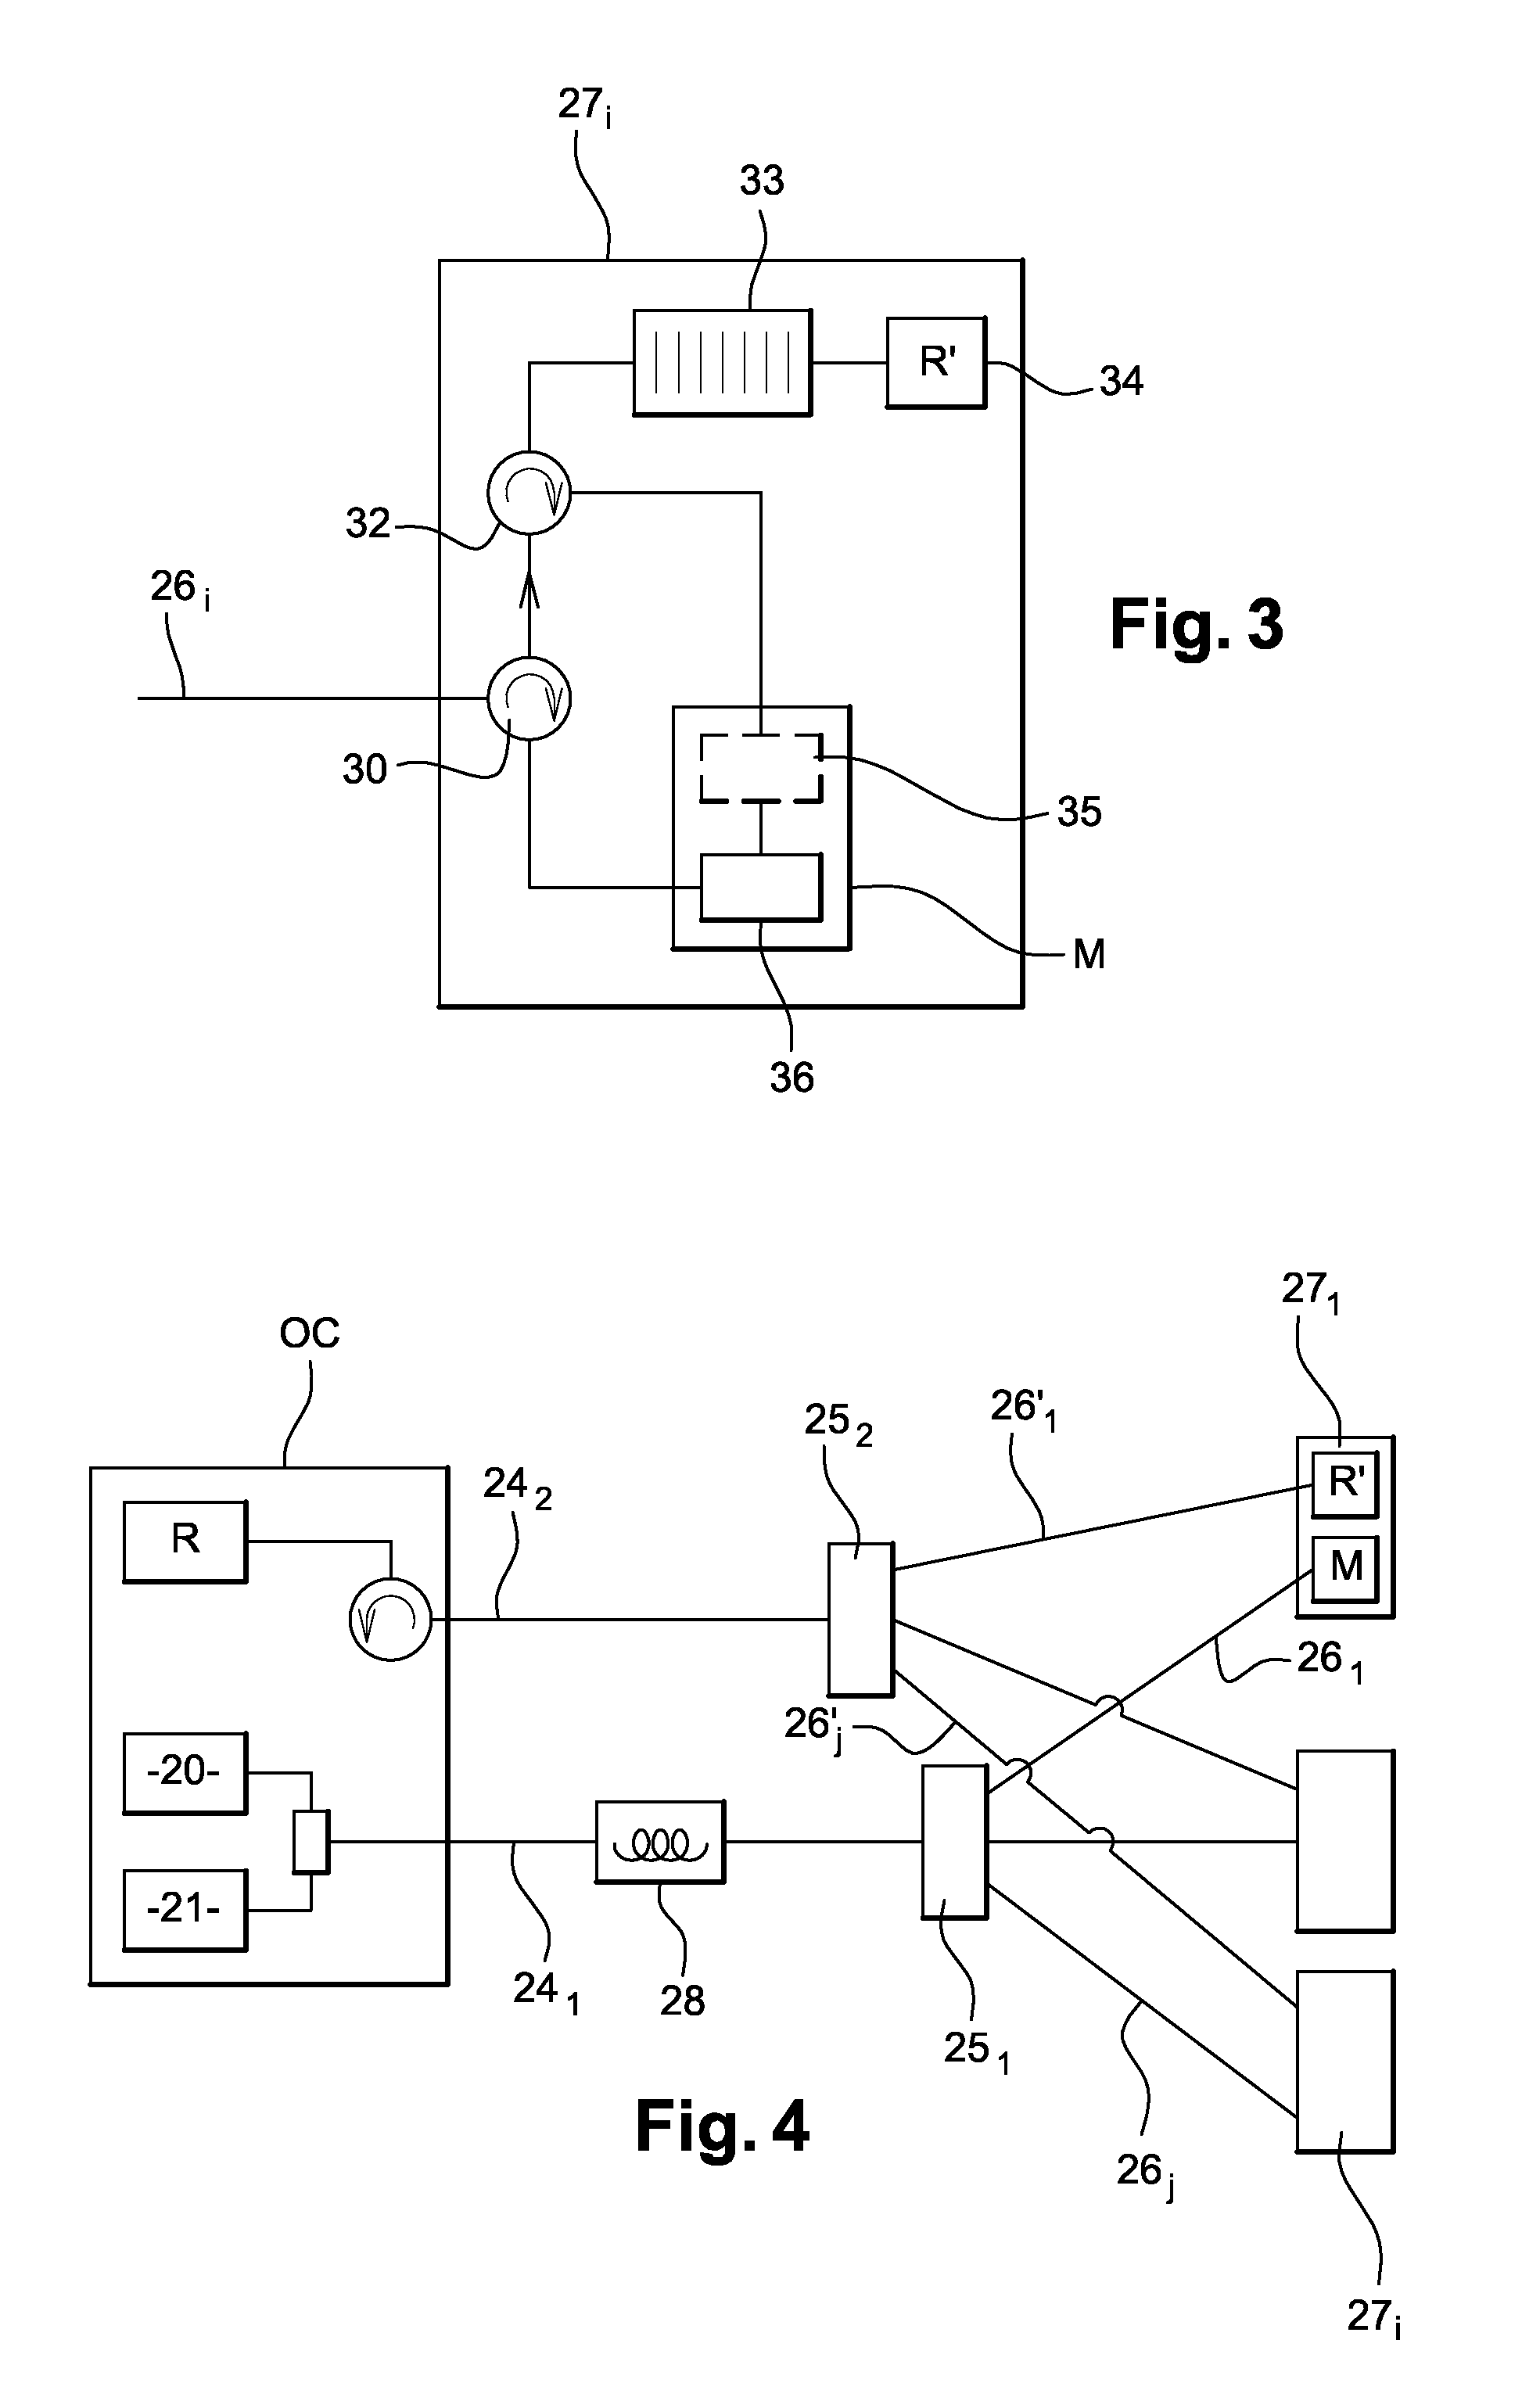 Long-reach passive optical network using remote modulation of an amplification optical signal